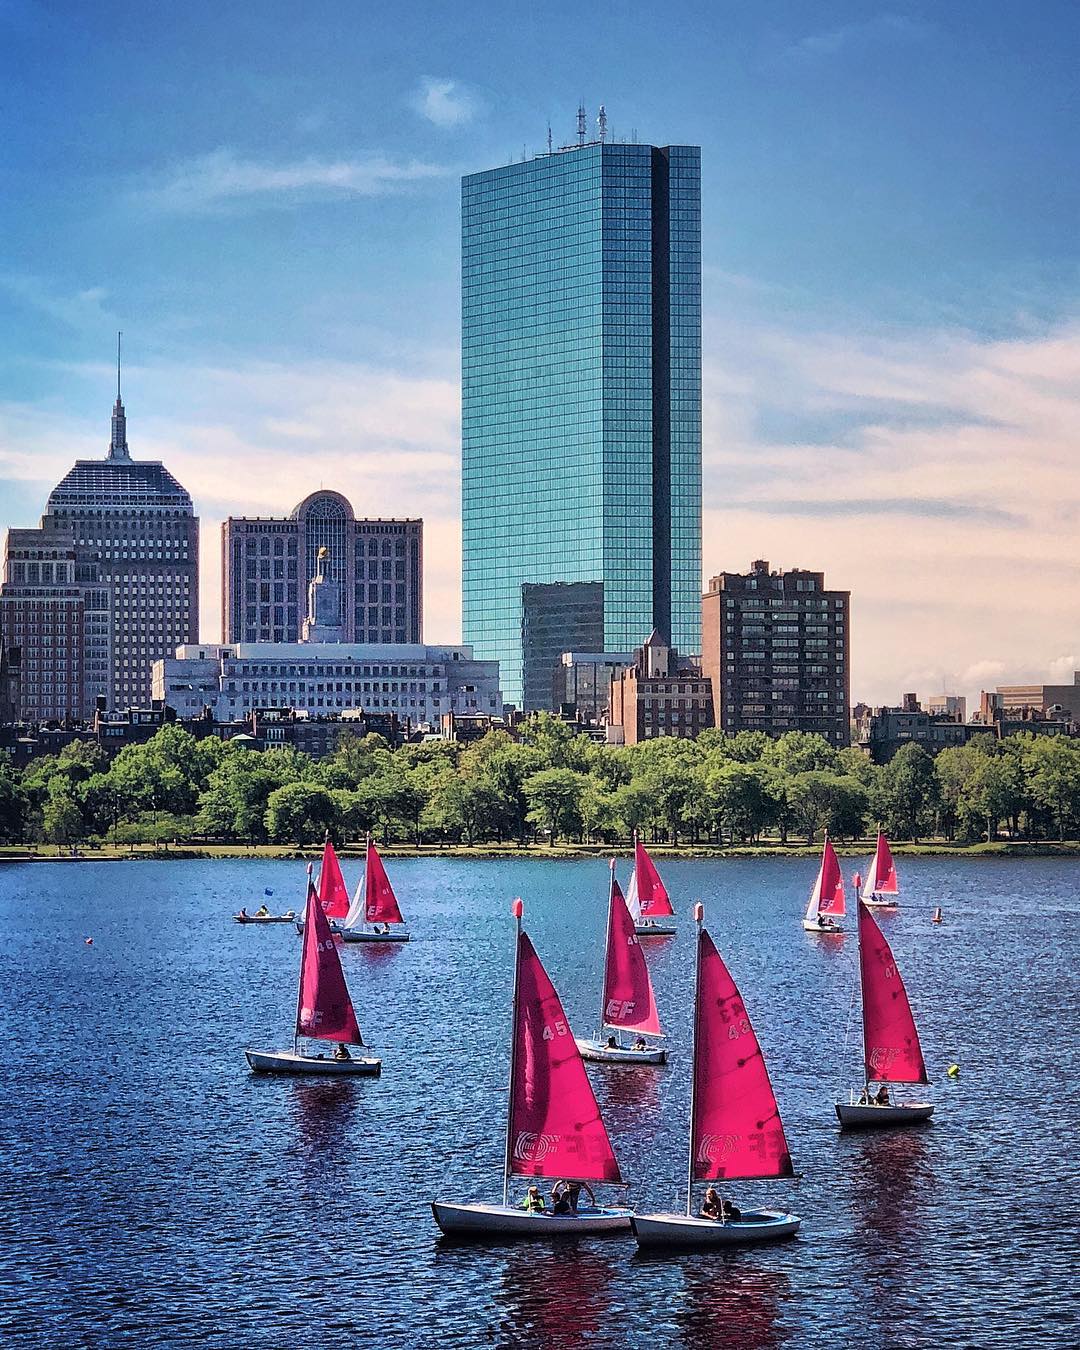 60 things to do in Boston this weekend [07/06/18]